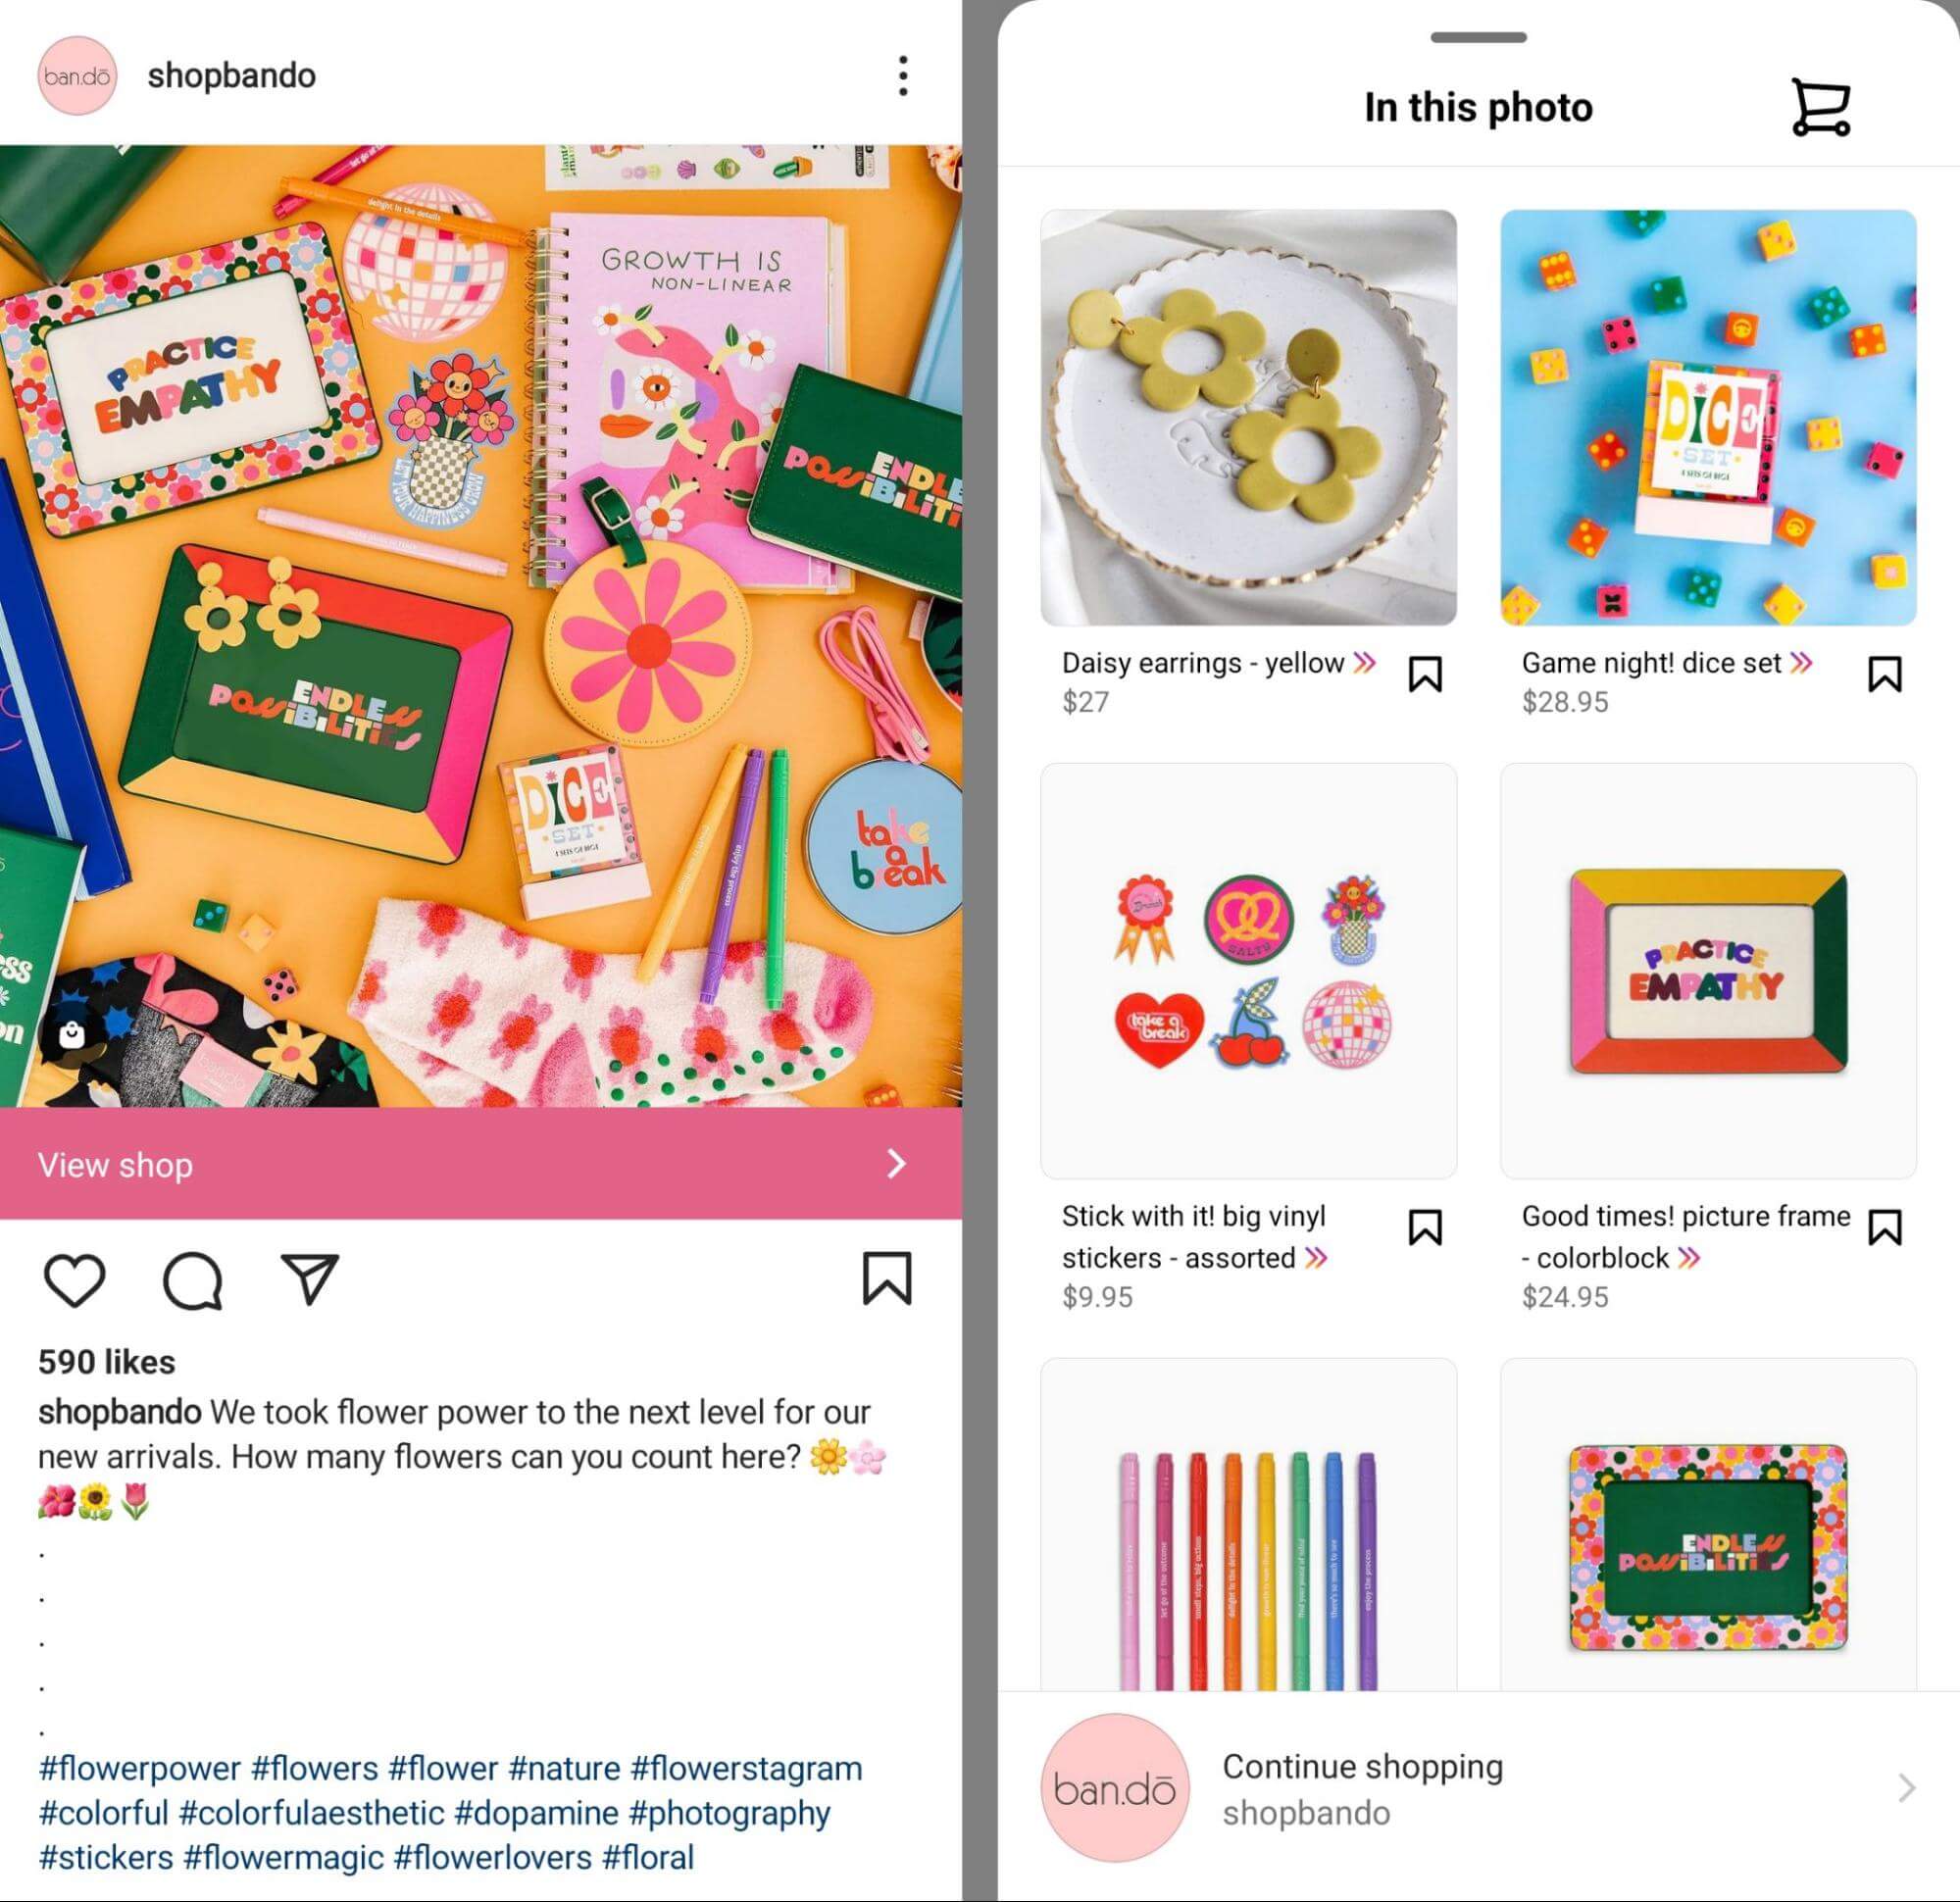 publish-organic-posts-and-reels-on-instagram-tag-shoppable-products-4